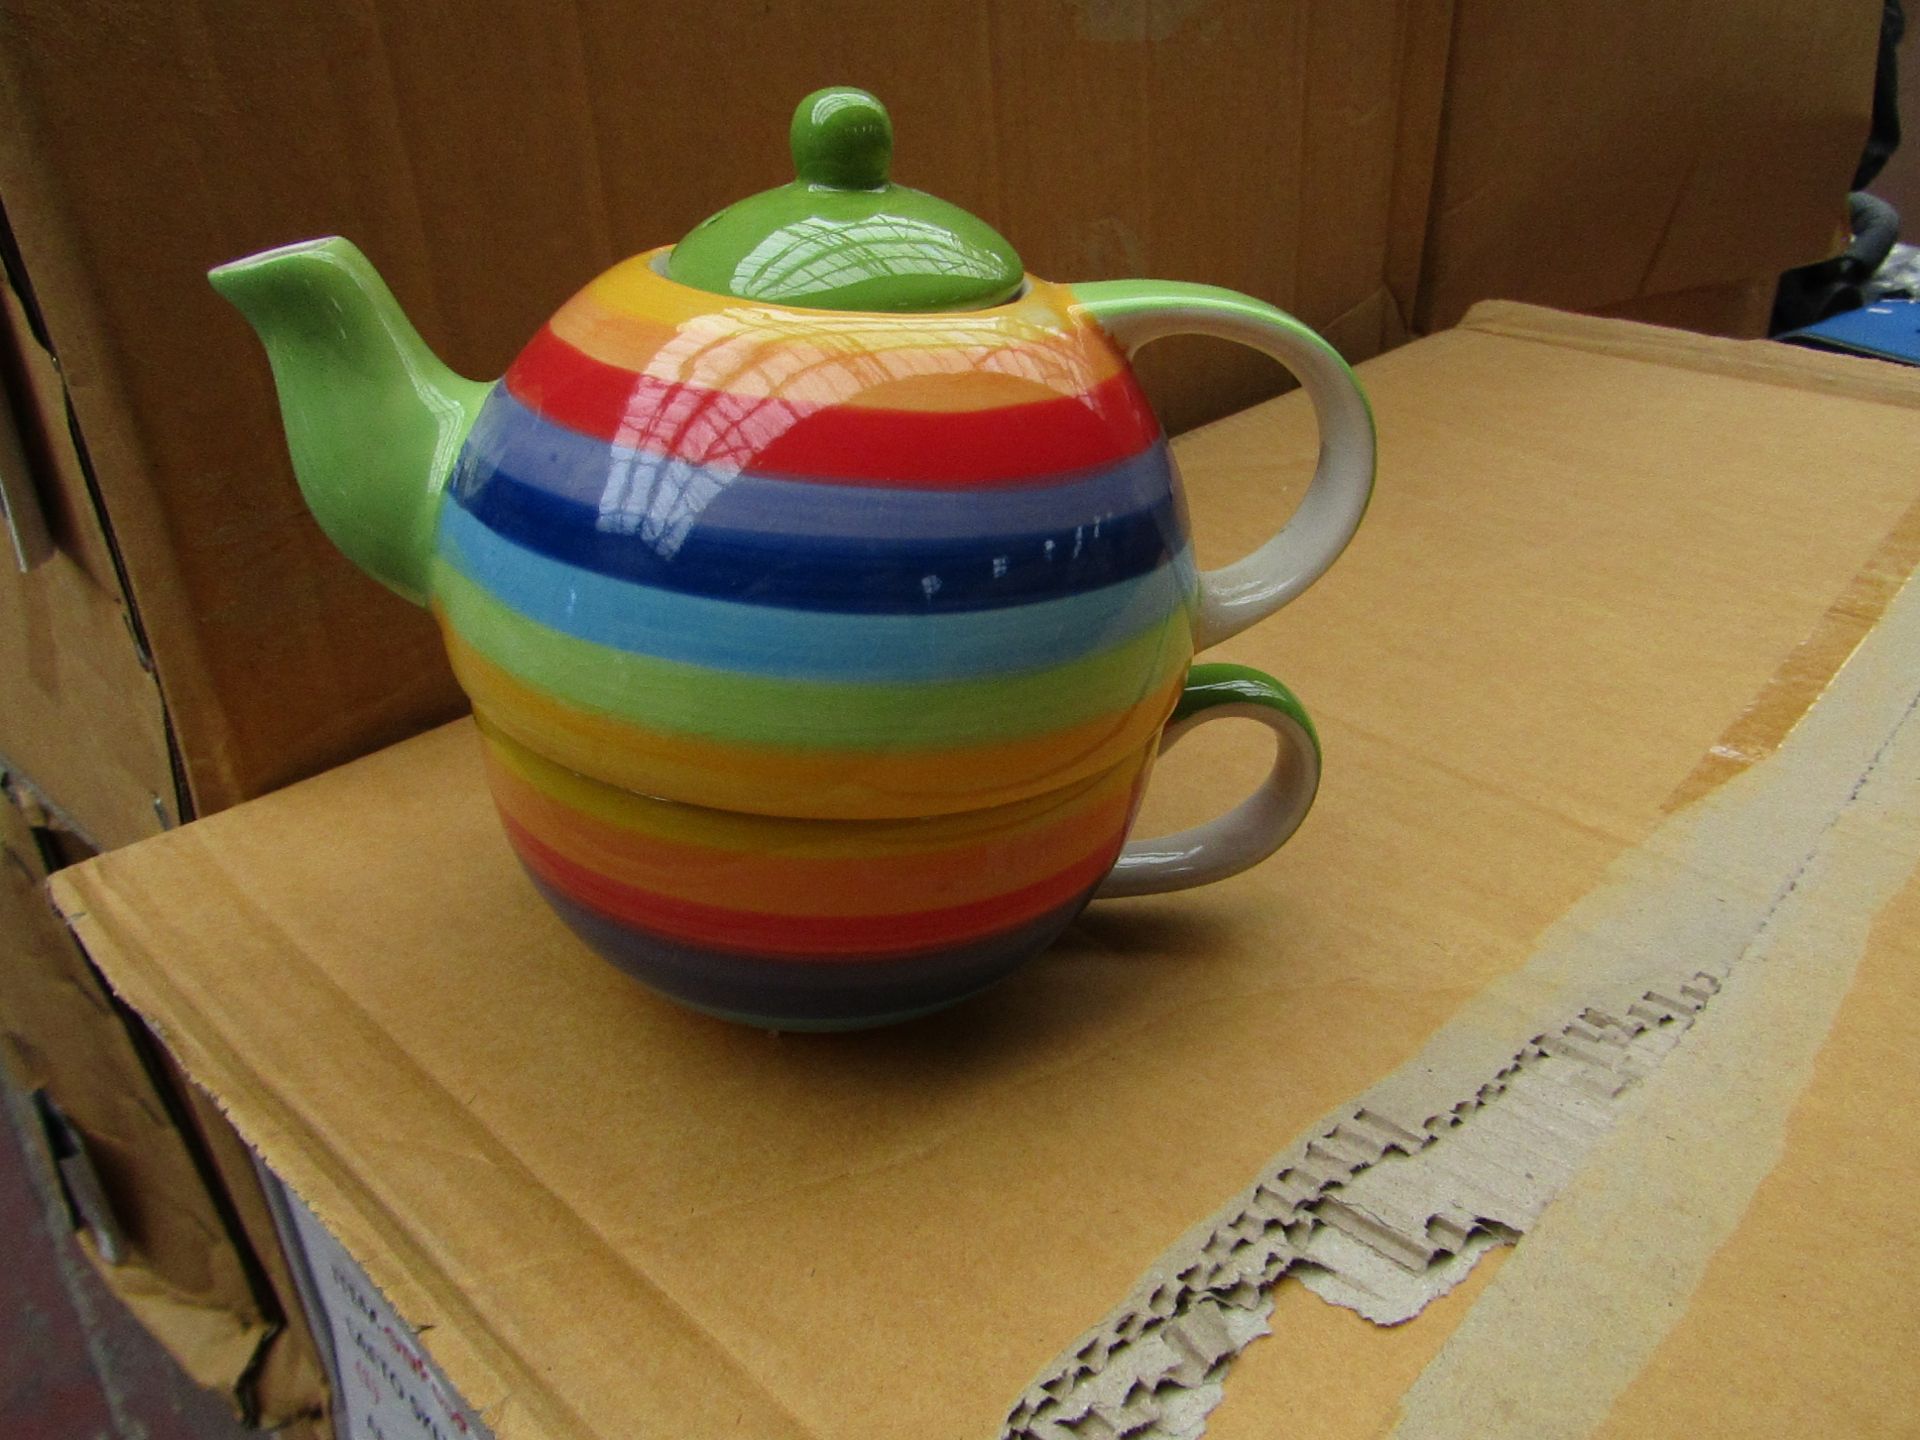 2x Rainbow - One Cup Teapot - New & Packaged.